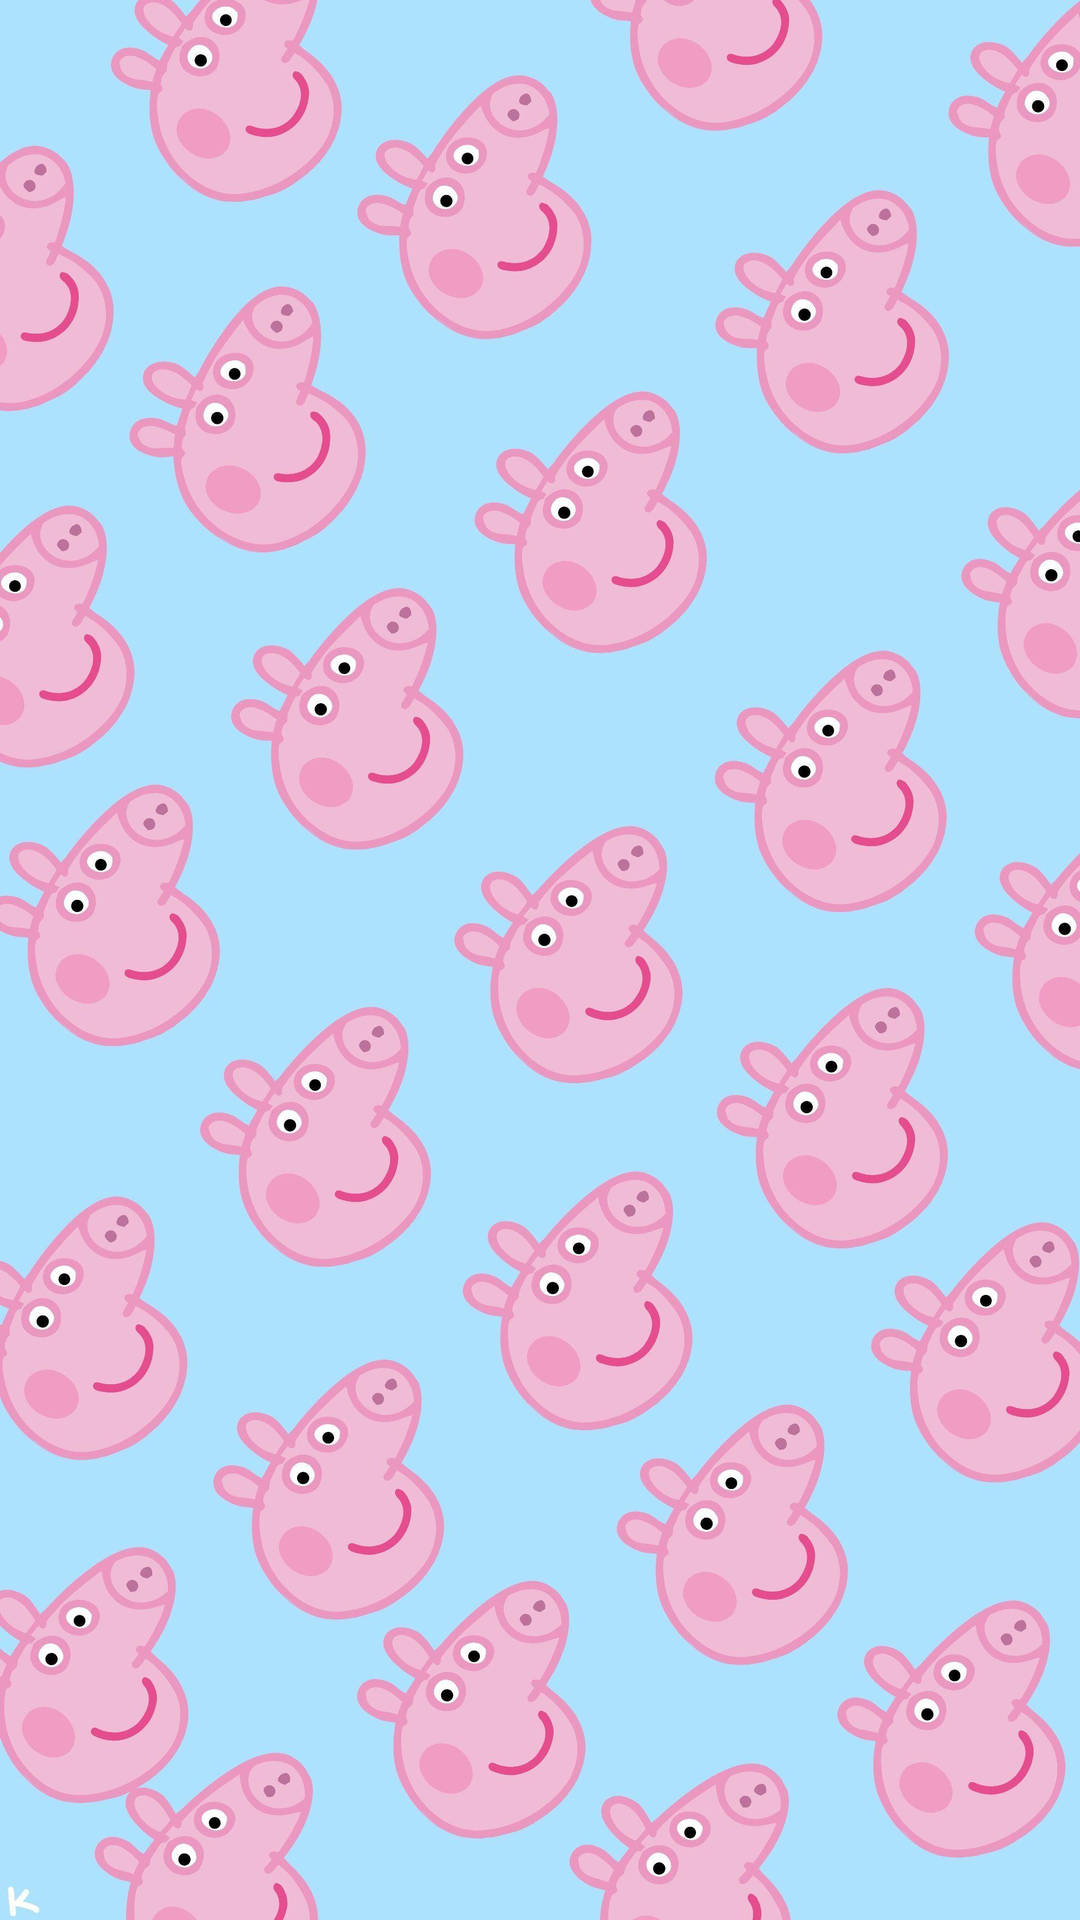 Faces Of Peppa Pig Iphone Background